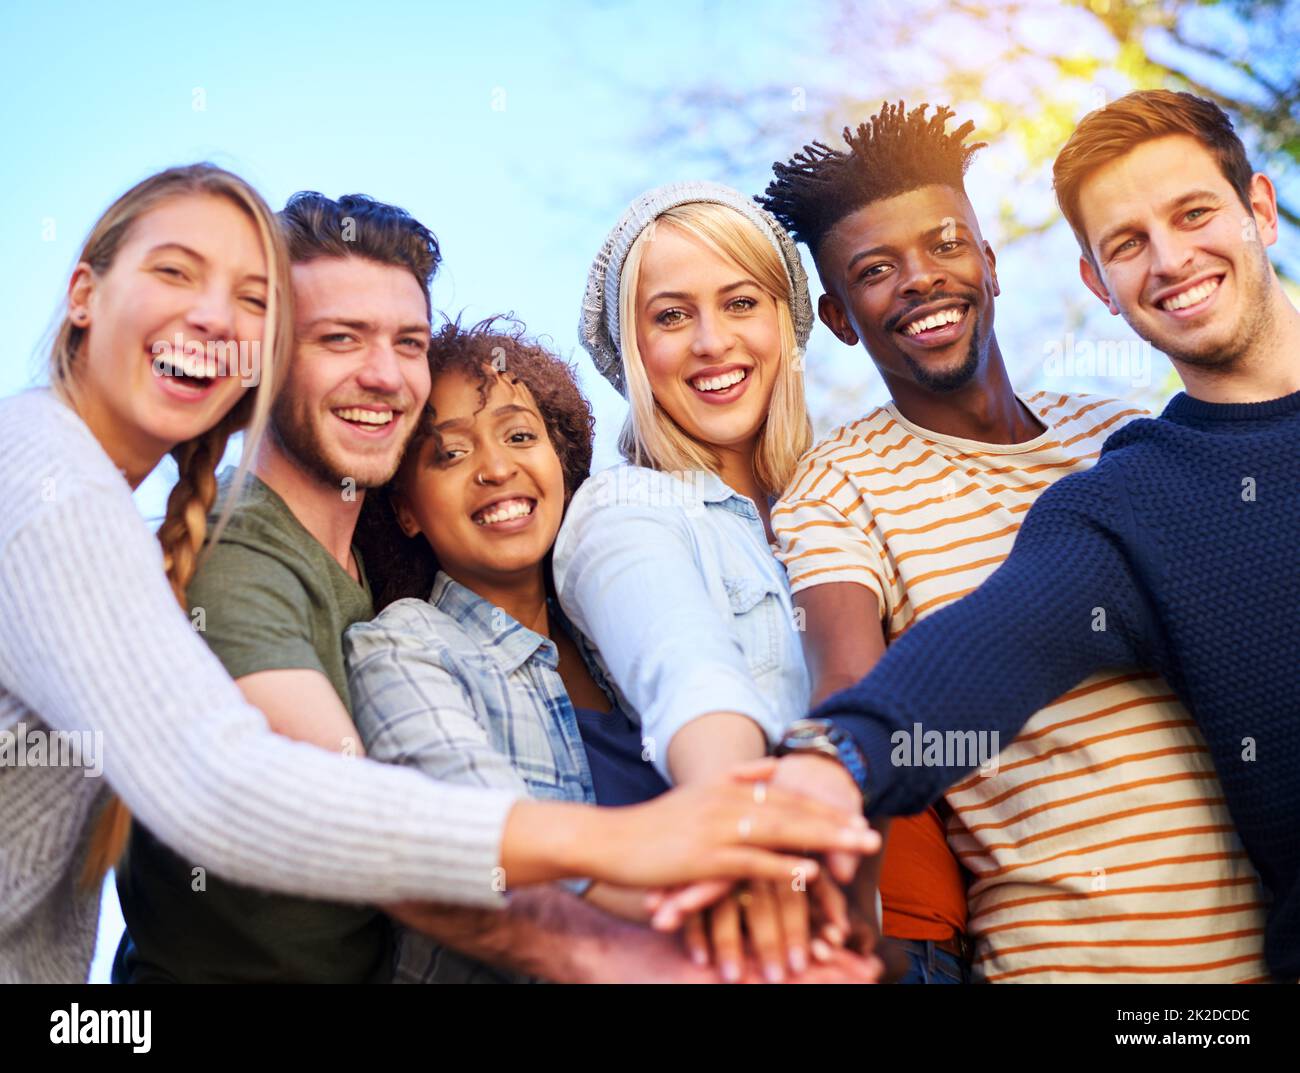 To becoming friends on campus. Cropped shot of a group of diverse students huddled together with their hands piled on top of each other. Stock Photo